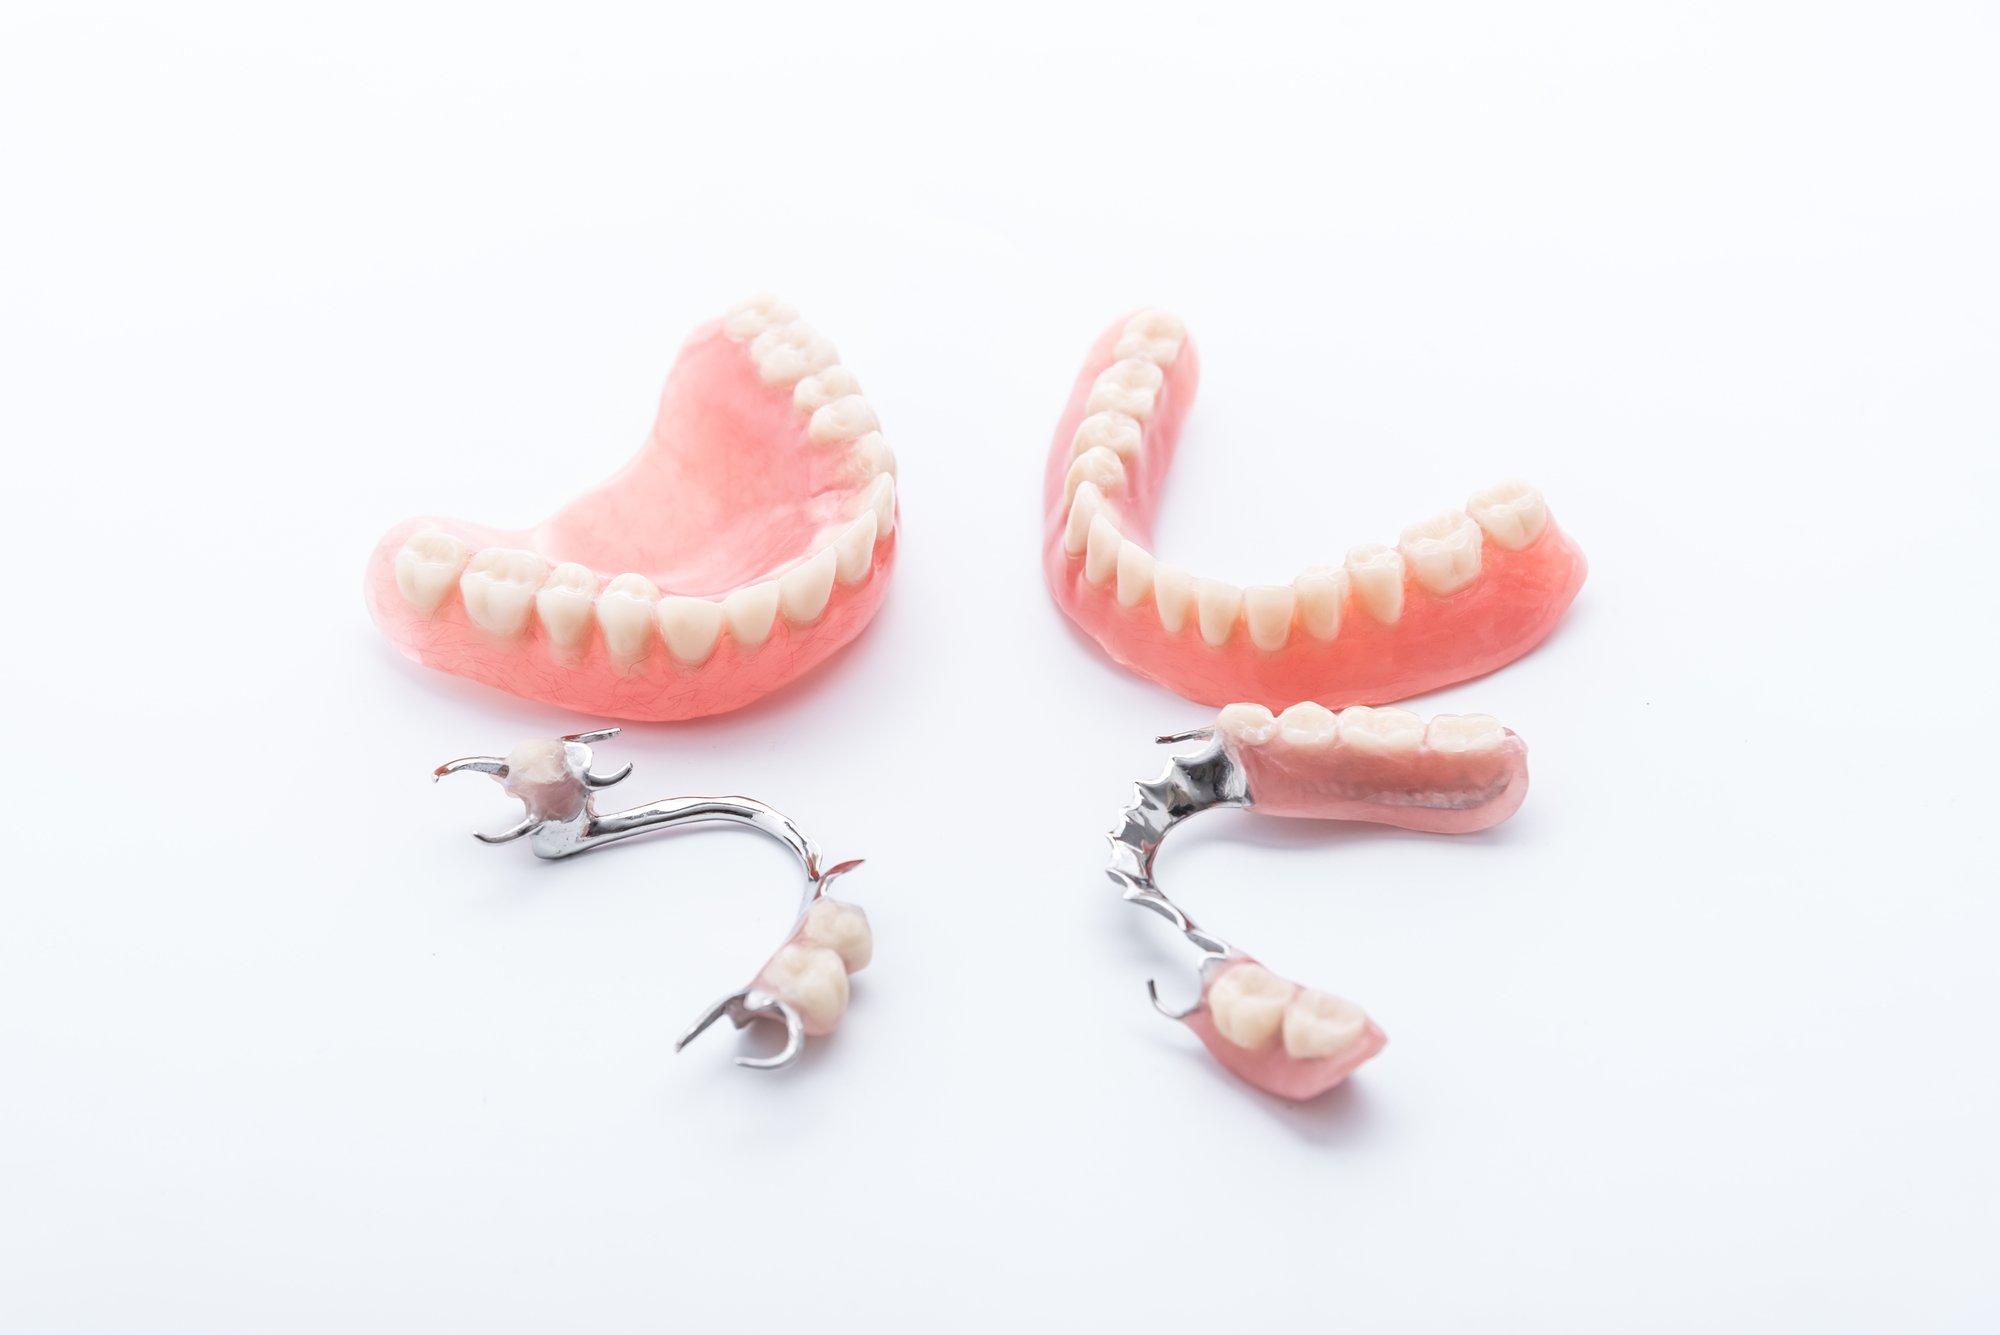 Set of partial dentures on white background